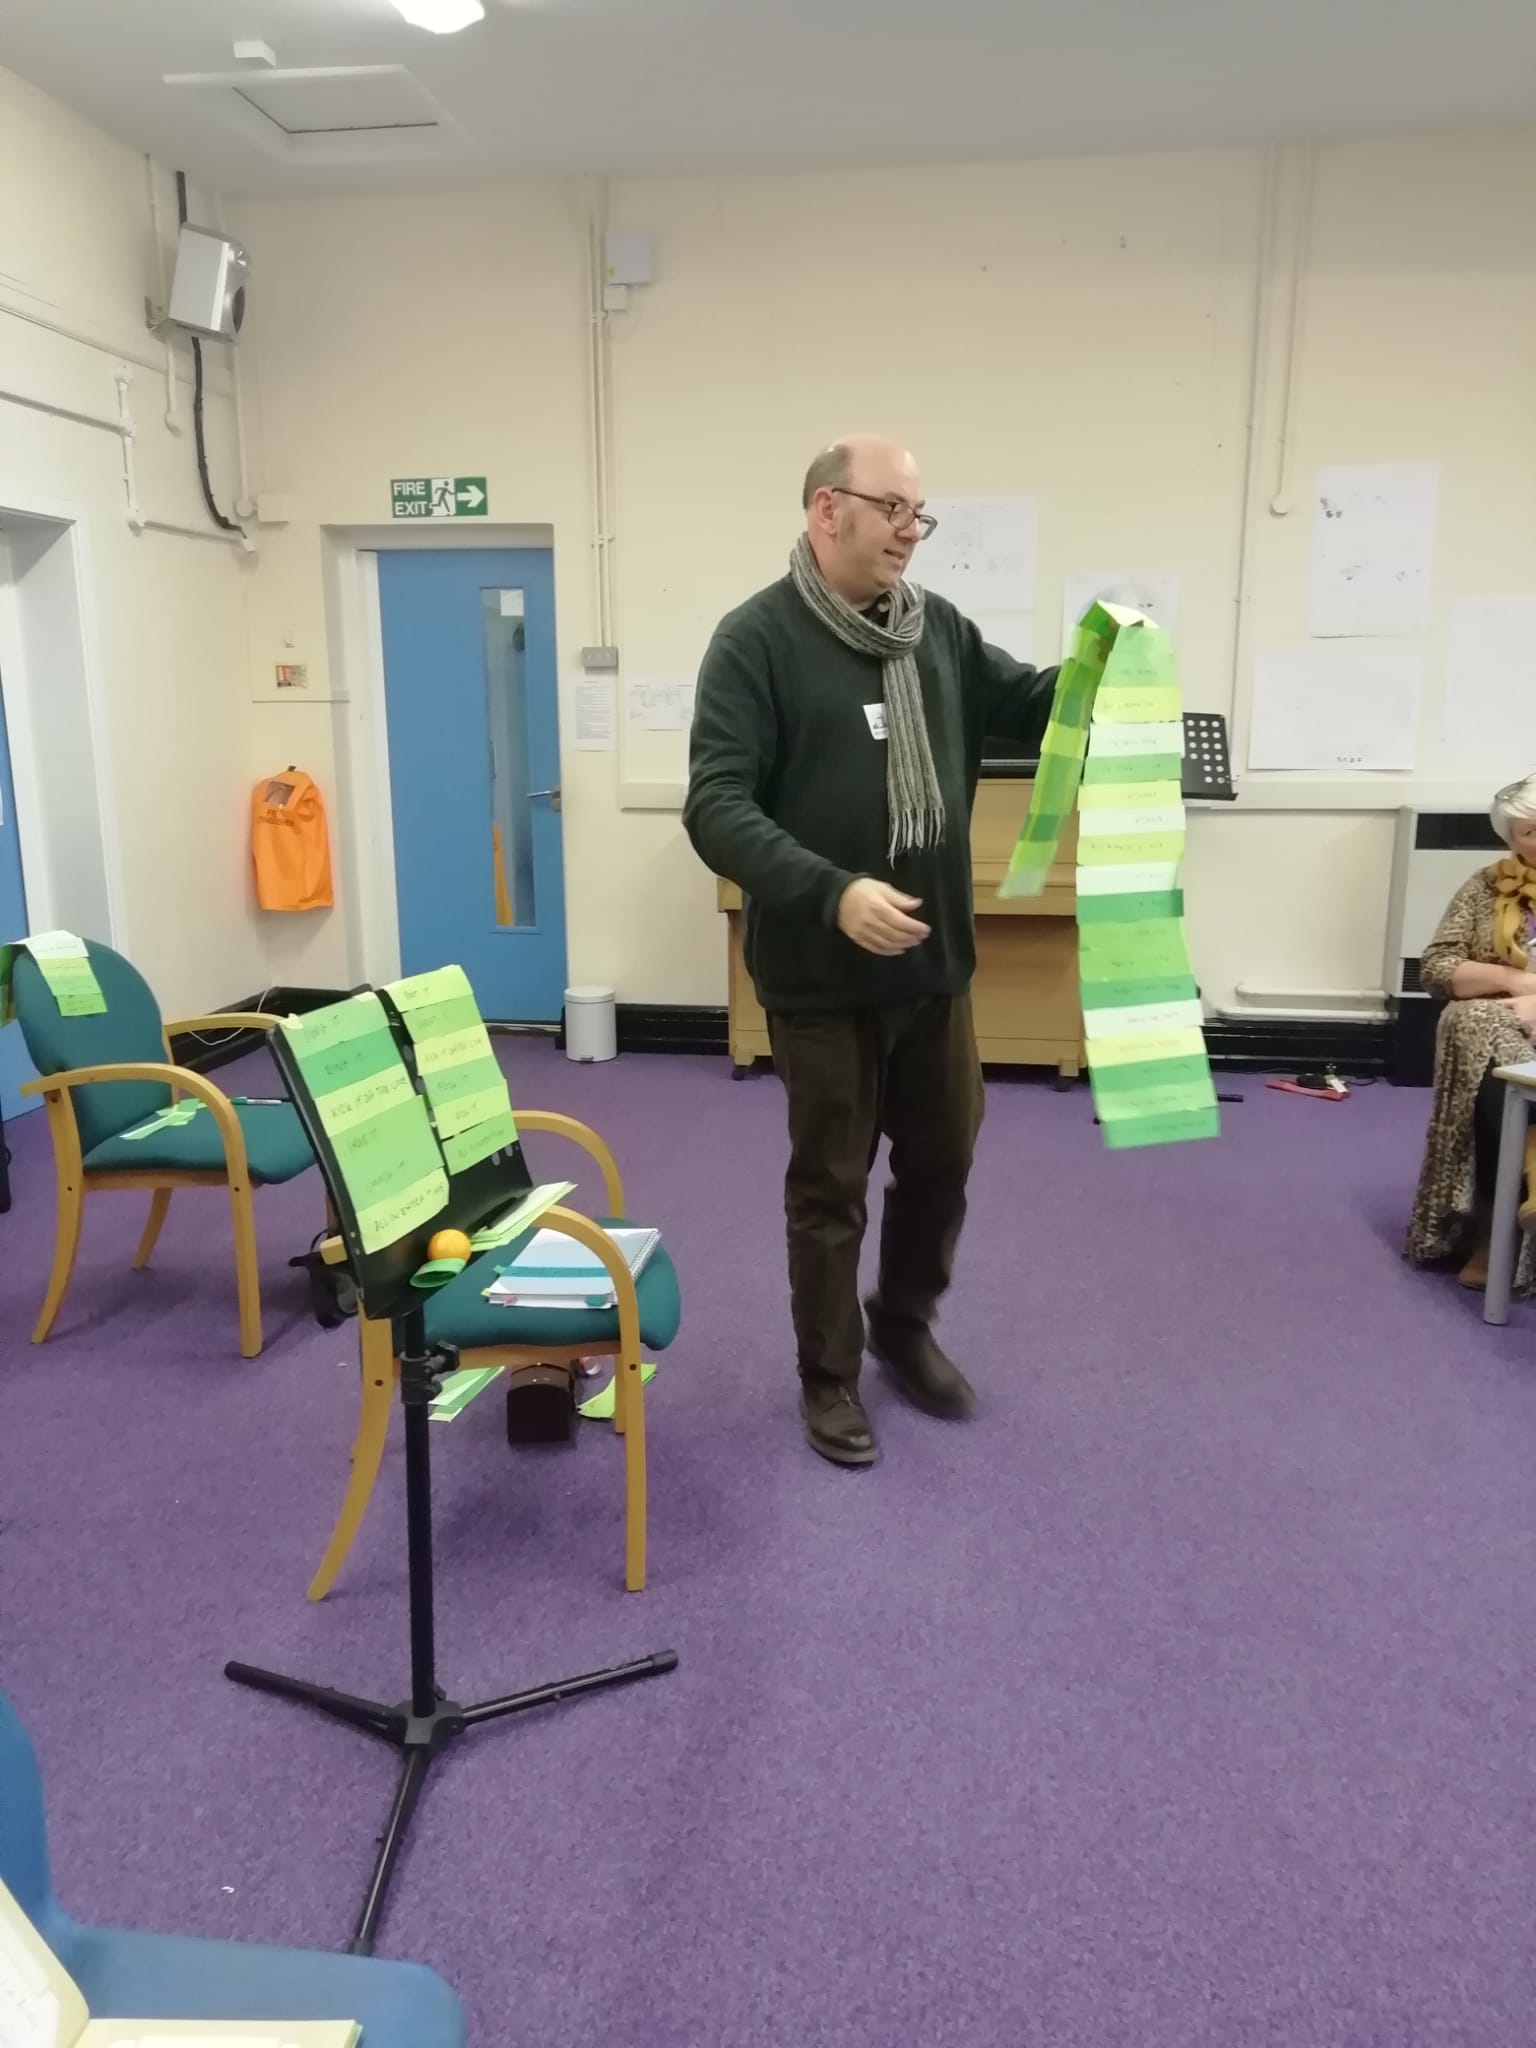 Gentlman with dark jumper and long scarf round his neck stands in class room reading off a long strip of green paper